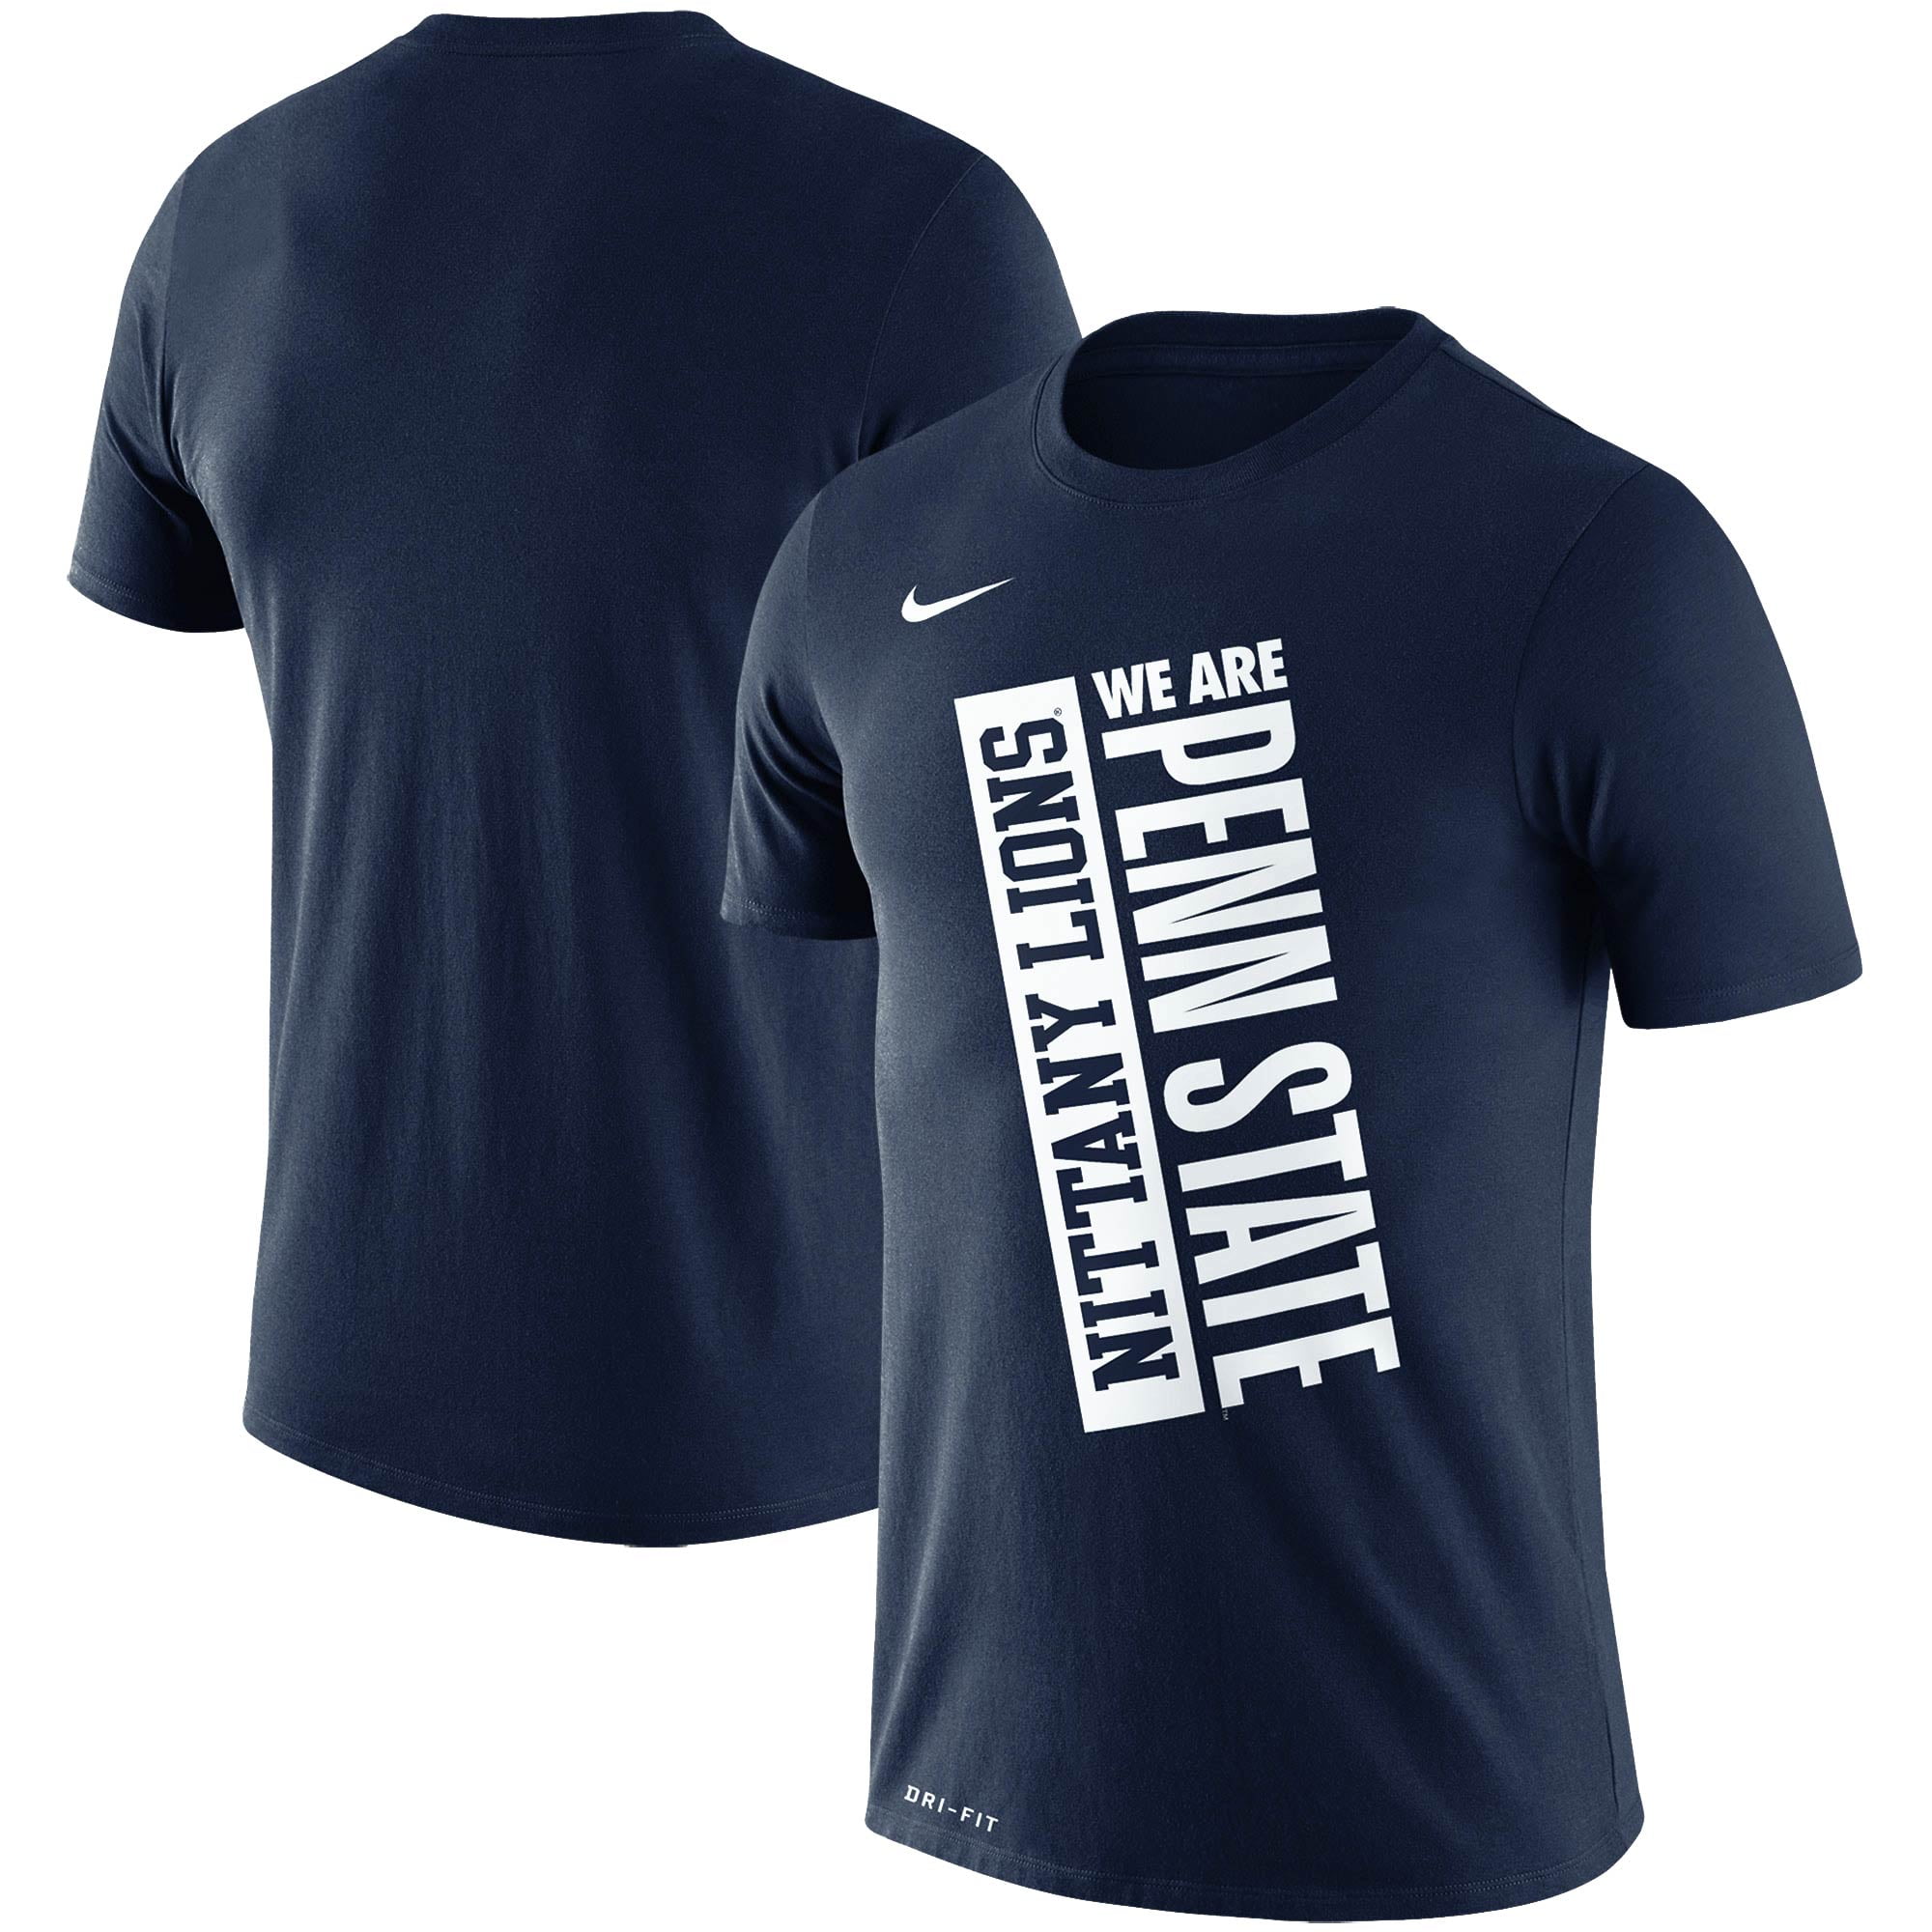 Penn State Nittany Lions Nike Basketball Just Do It Performance T-Shirt ...